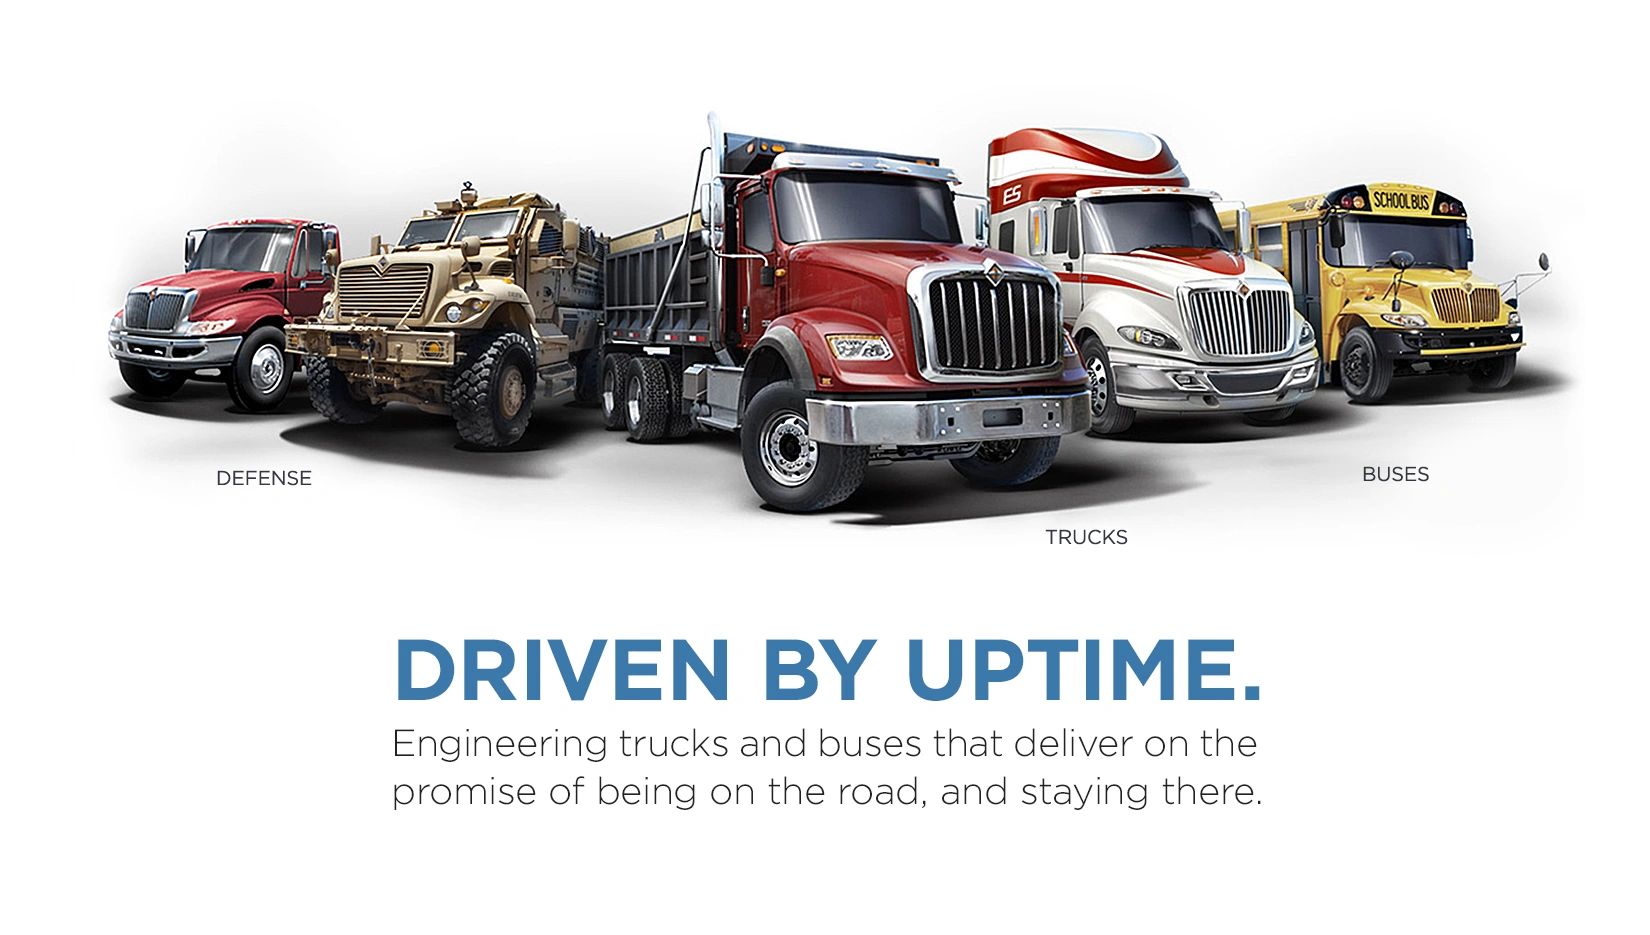 International Trucks-Driven By Uptime with the promise of being on the road and staying there